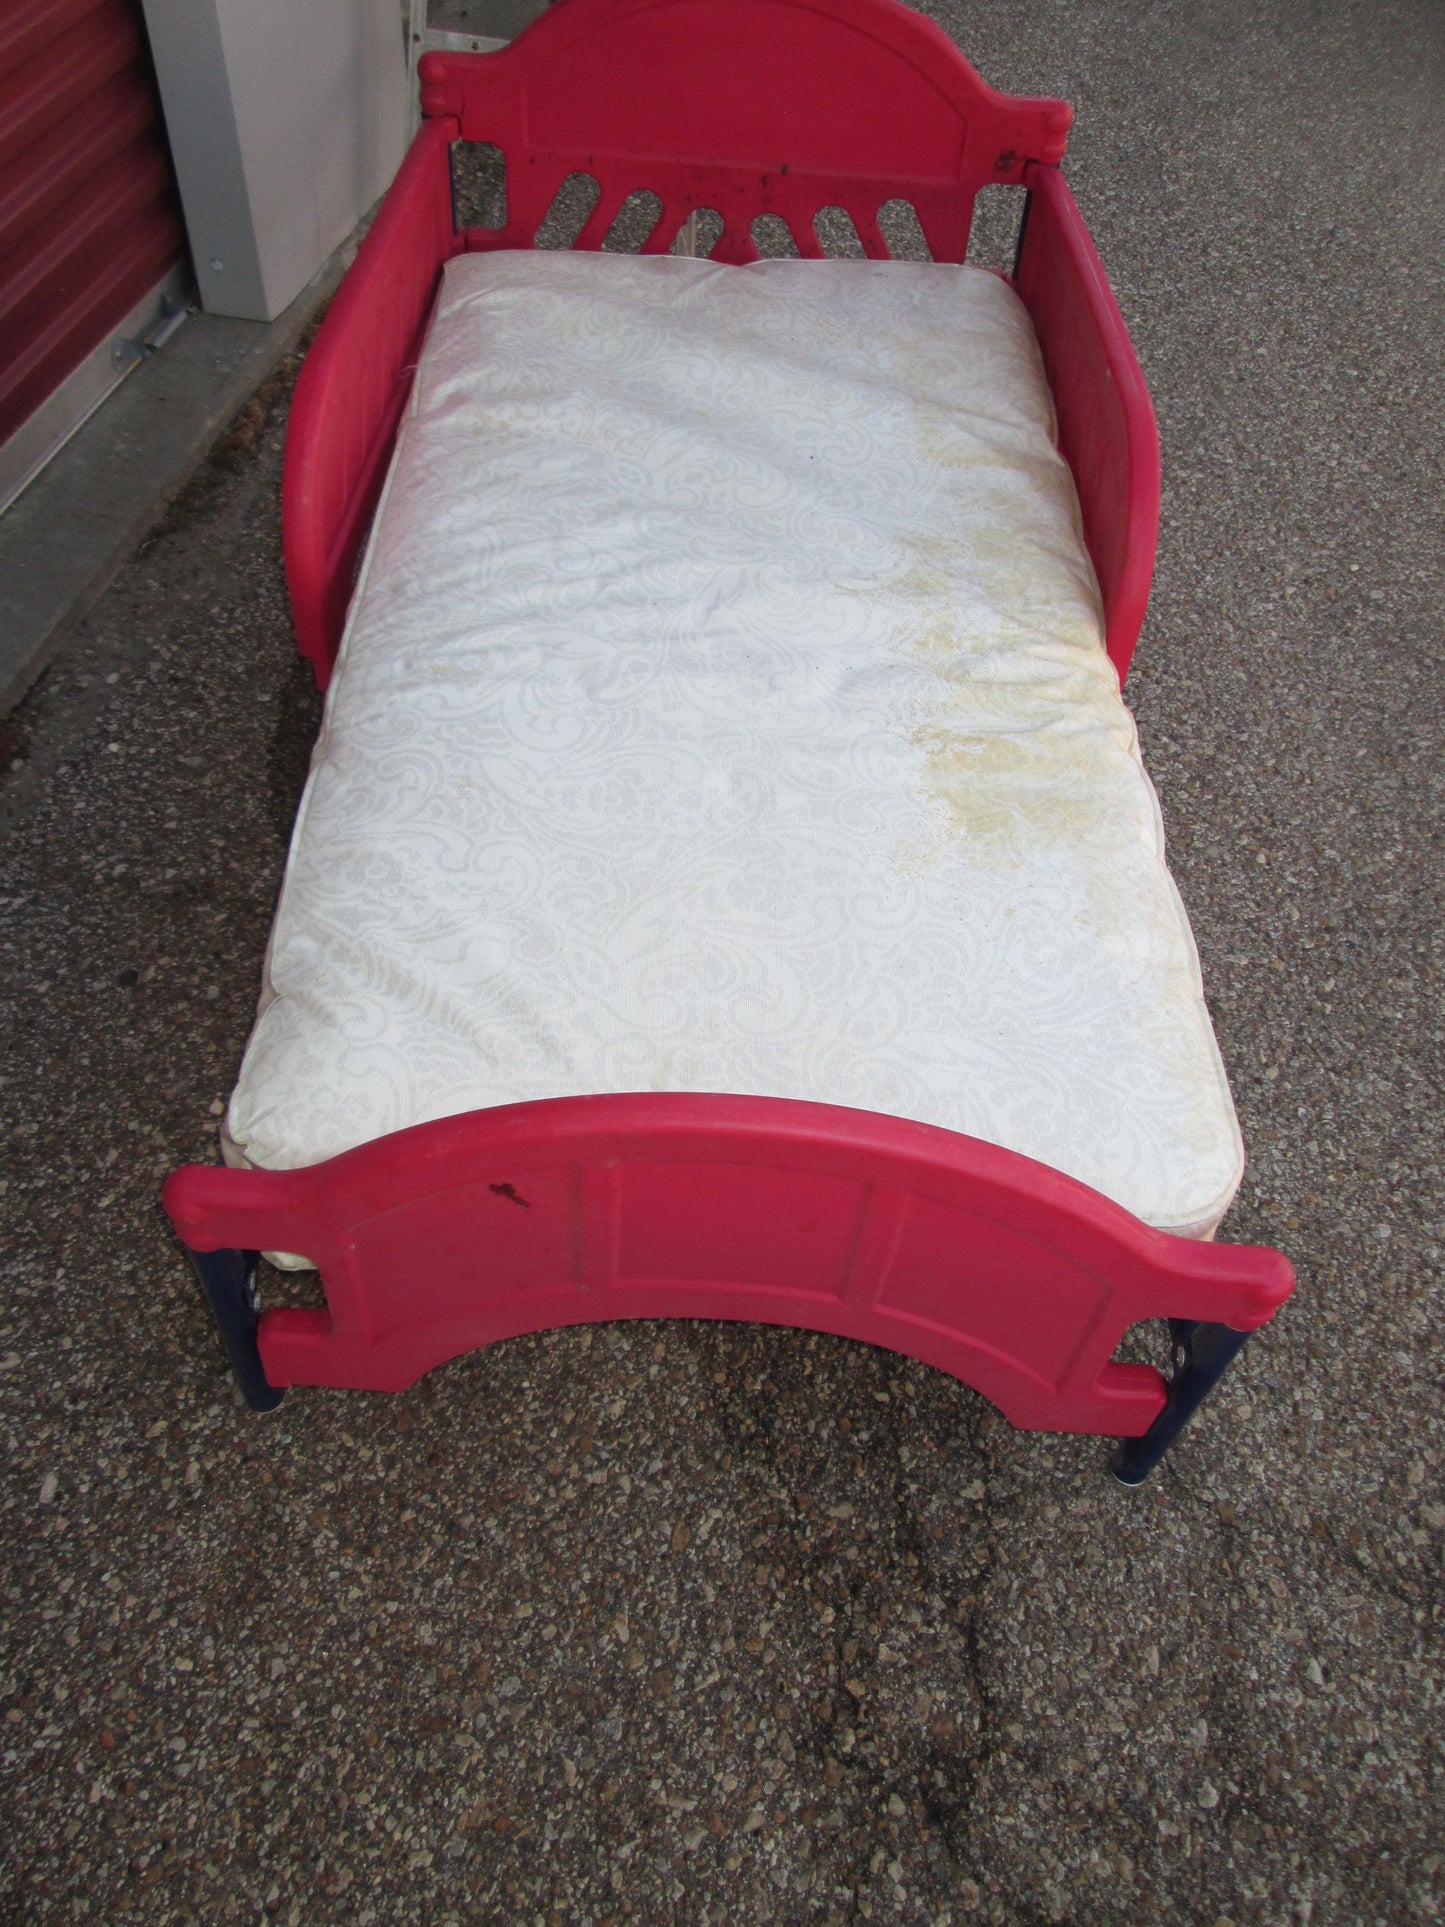 0129 - Plastic Youth Day Bed